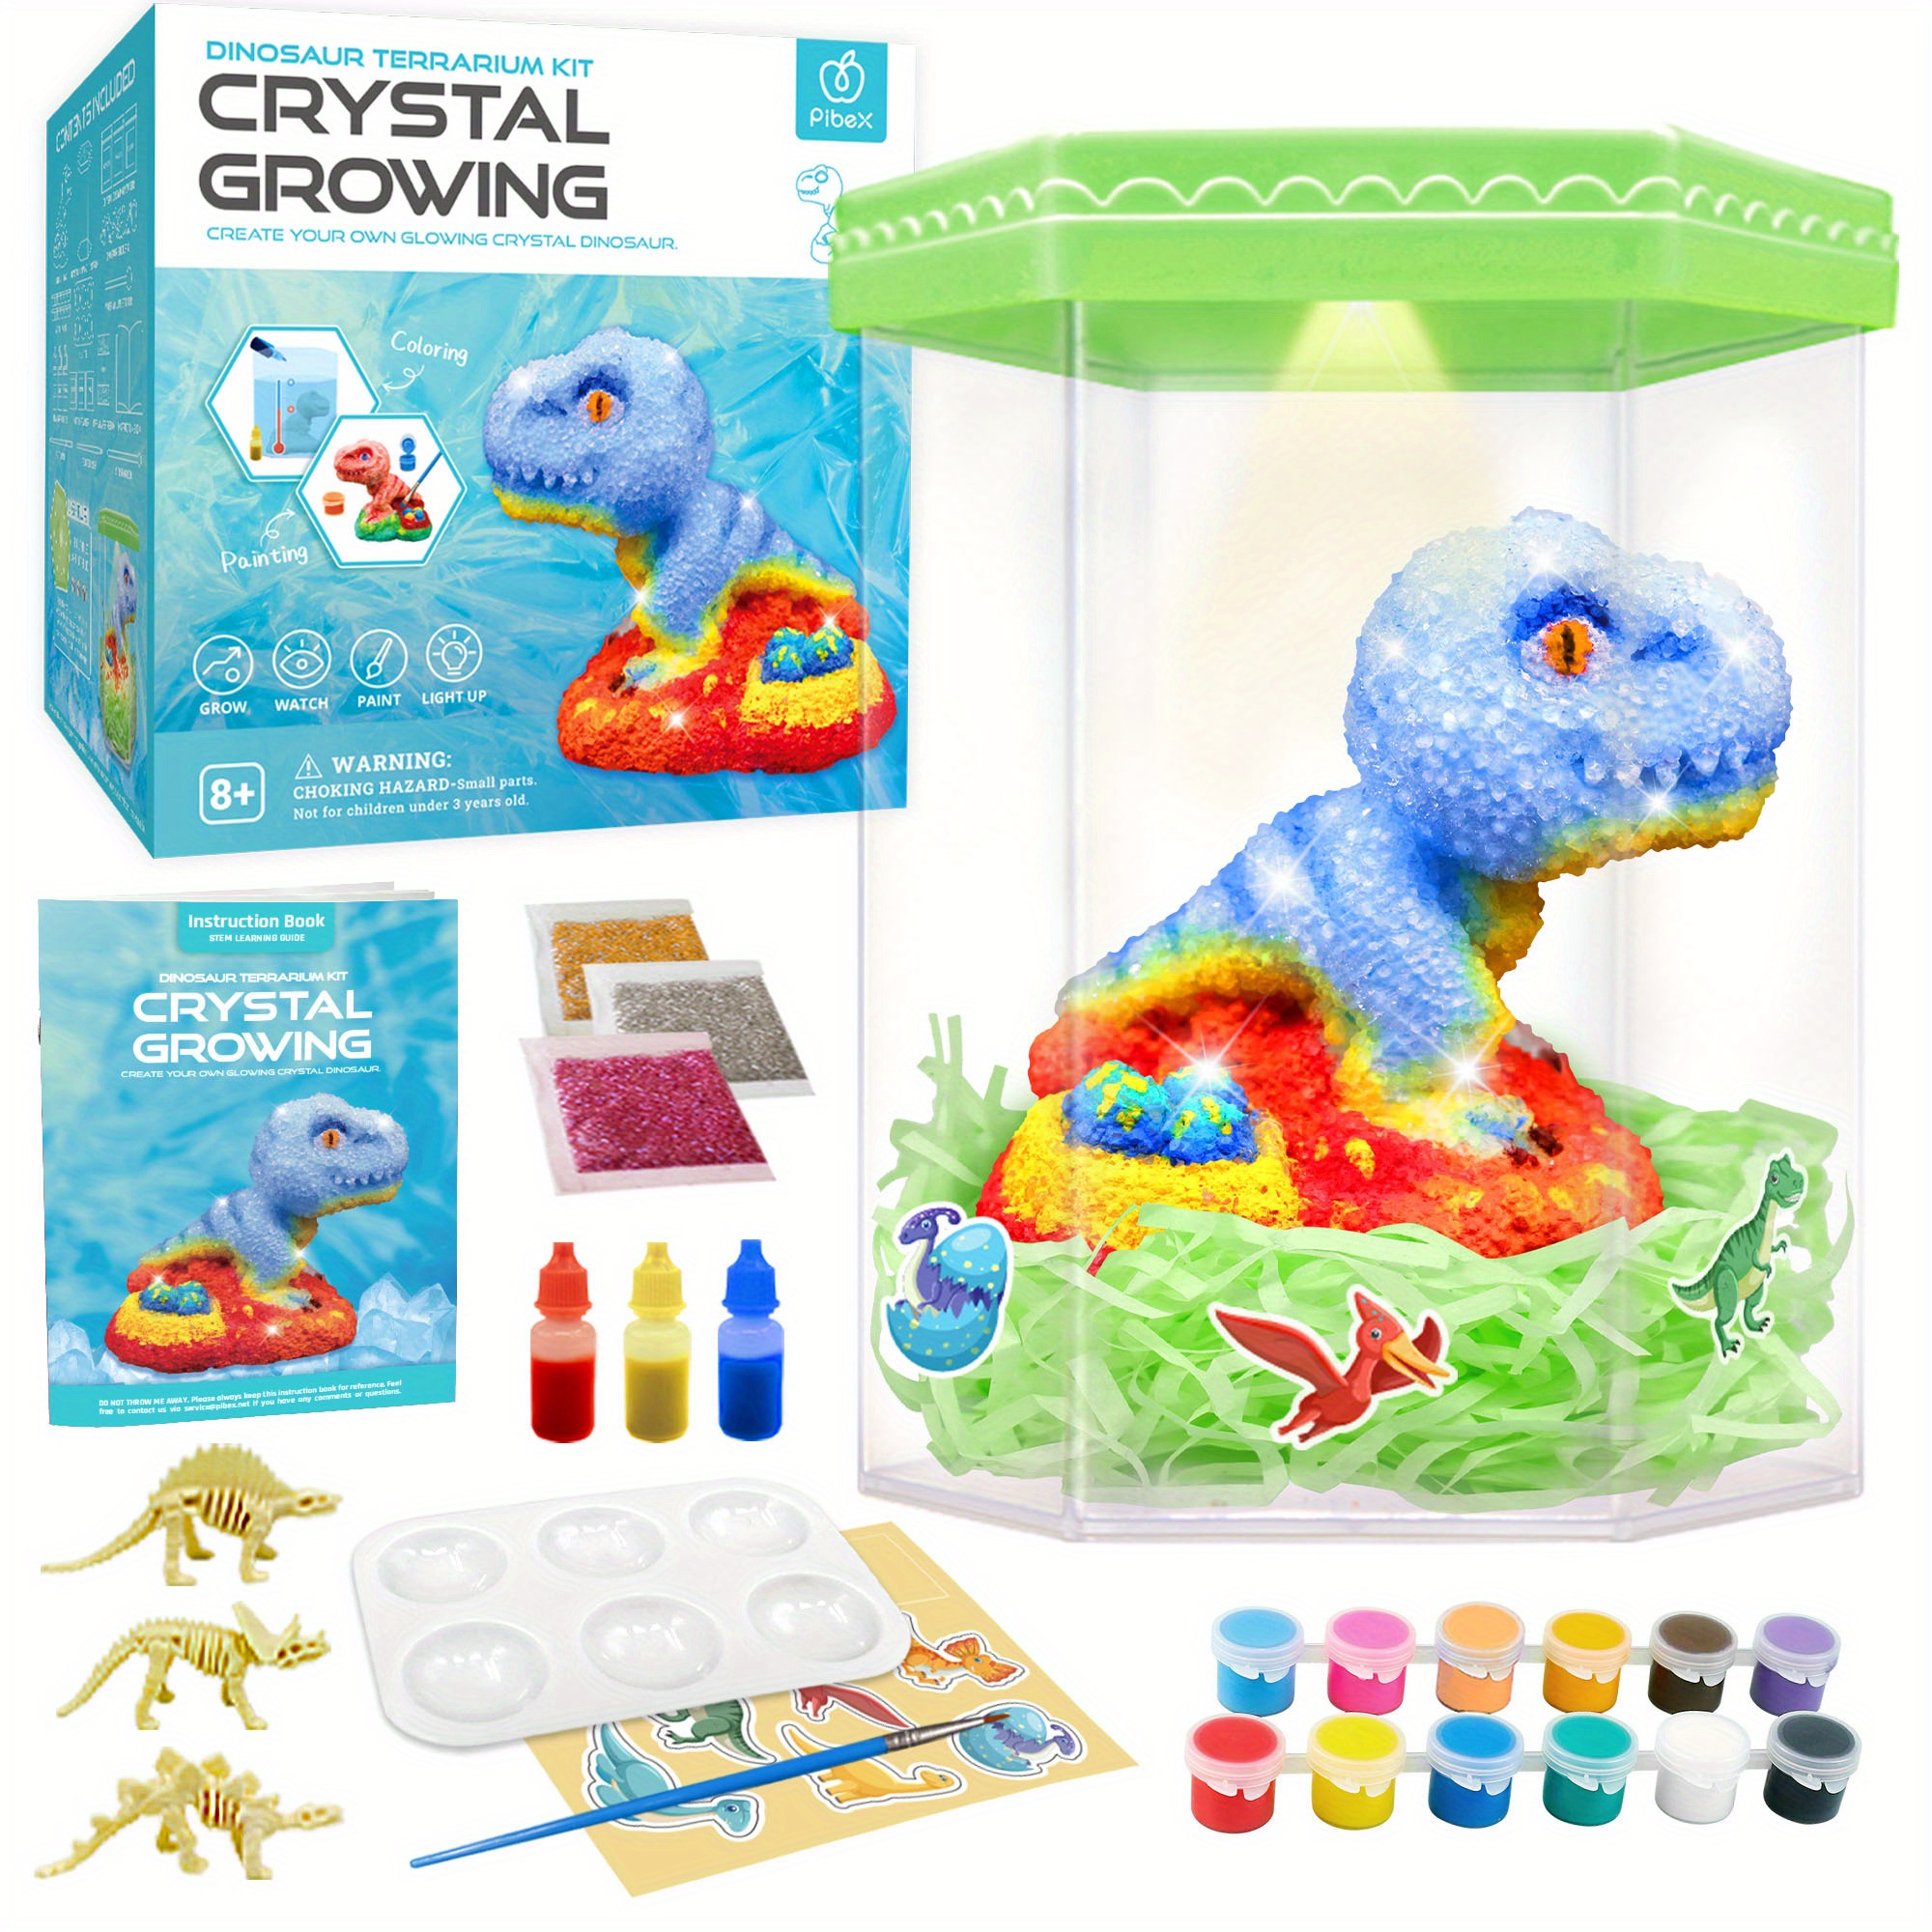 

Crystal Growing Kit, Light-up Dinosaur Terrarium Kit, Grow, Paint & Decorate Your Own Dinosaur, Diy Stem Project Educational Arts And Crafts Set, Gift Idea For Boy & Girl Aged 8+